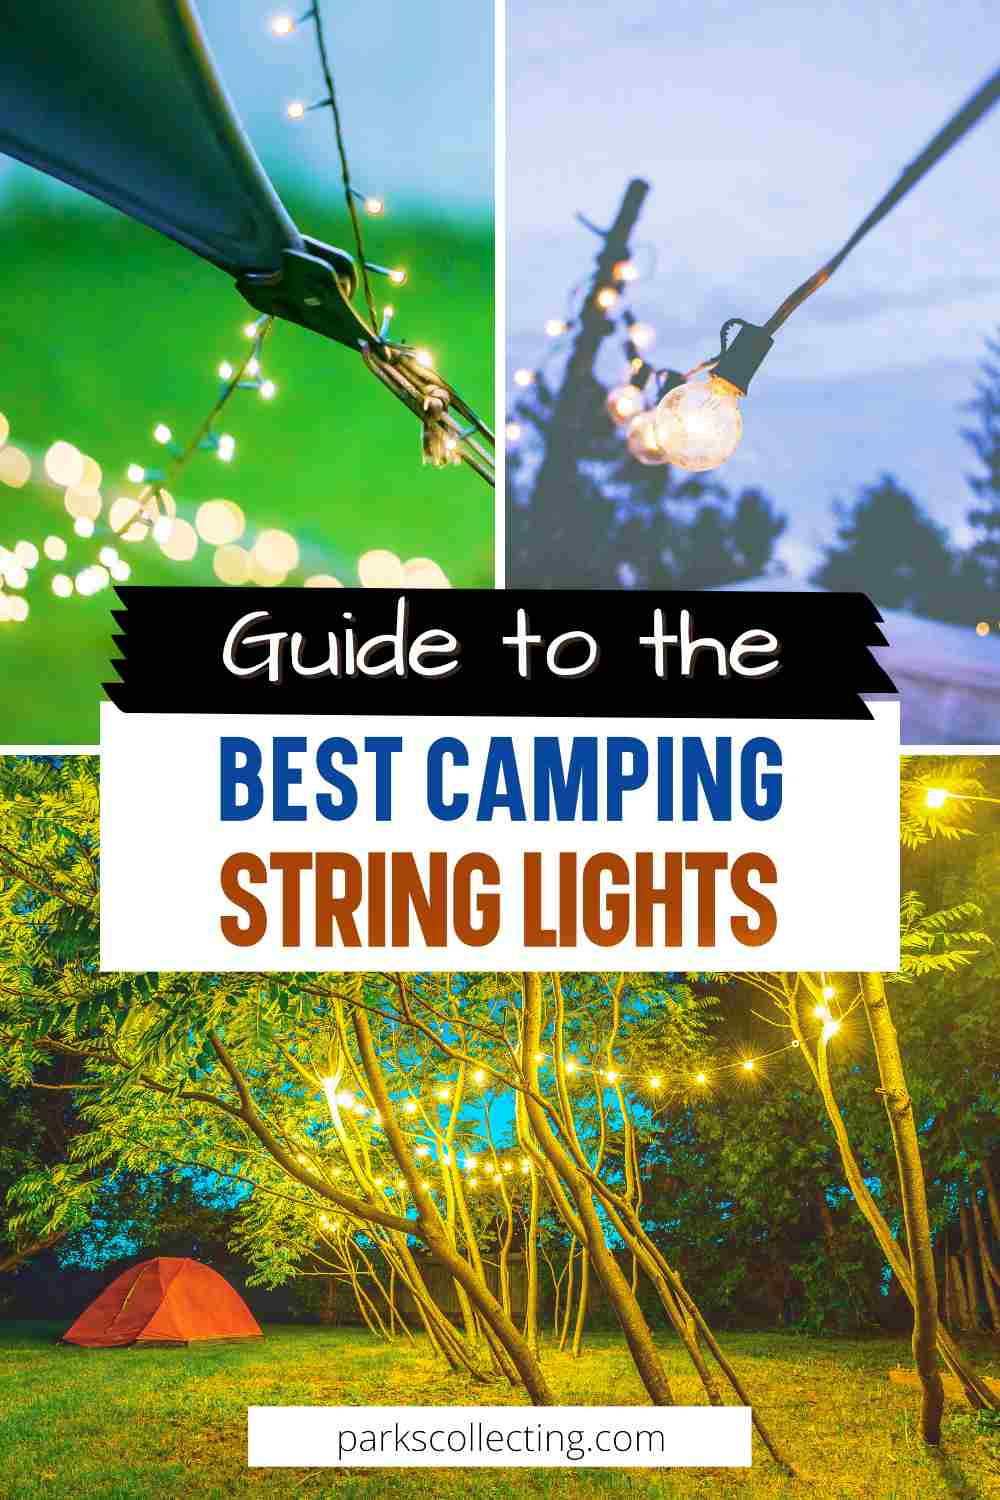 https://parkscollecting.com/wp-content/uploads/Guide-to-the-Best-Camping-String-Lights-Outdoors.jpg